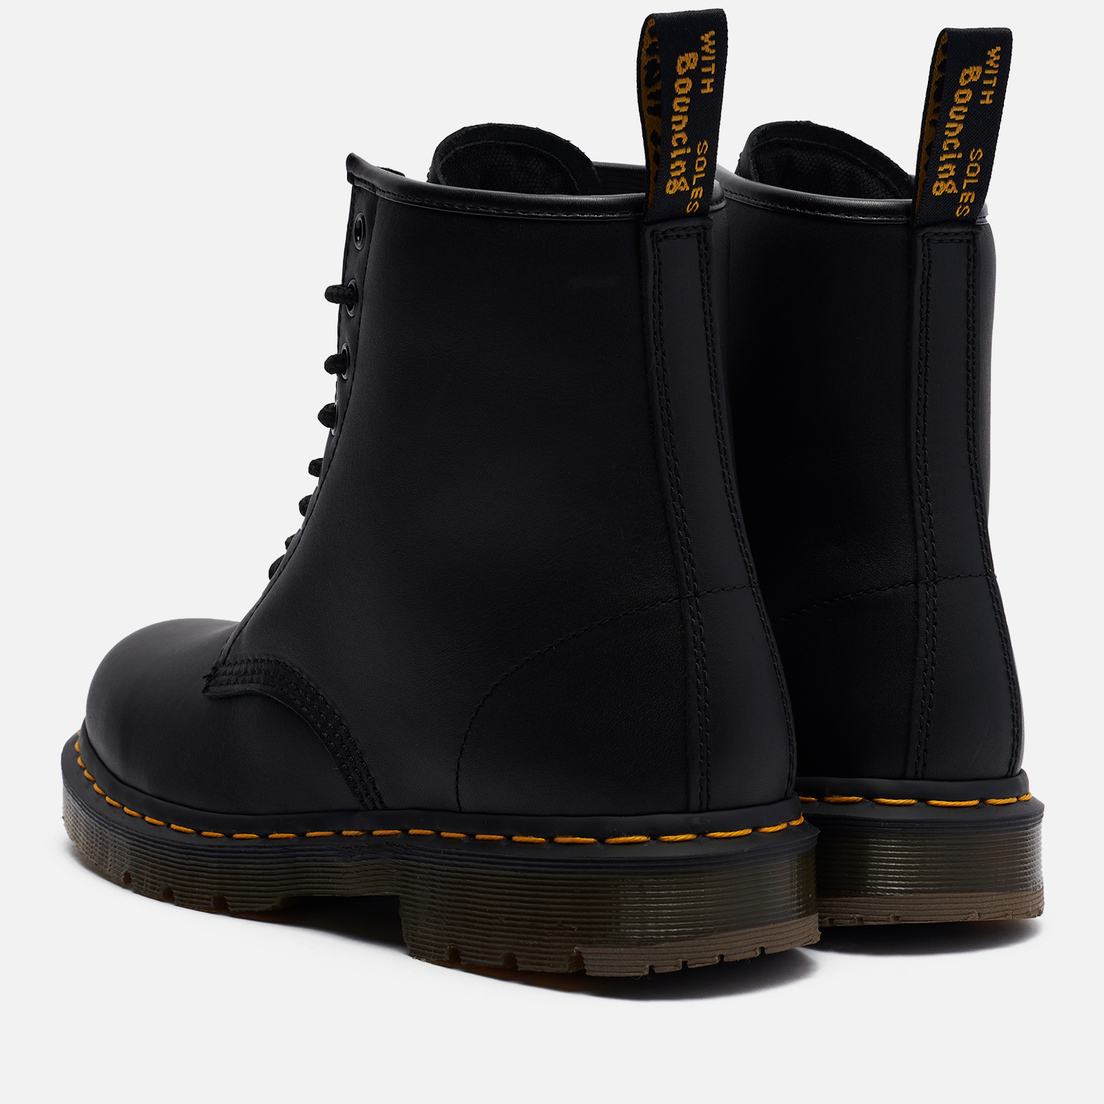 Dr. Martens Ботинки 1460 Lace Up Slip Resistant Leather